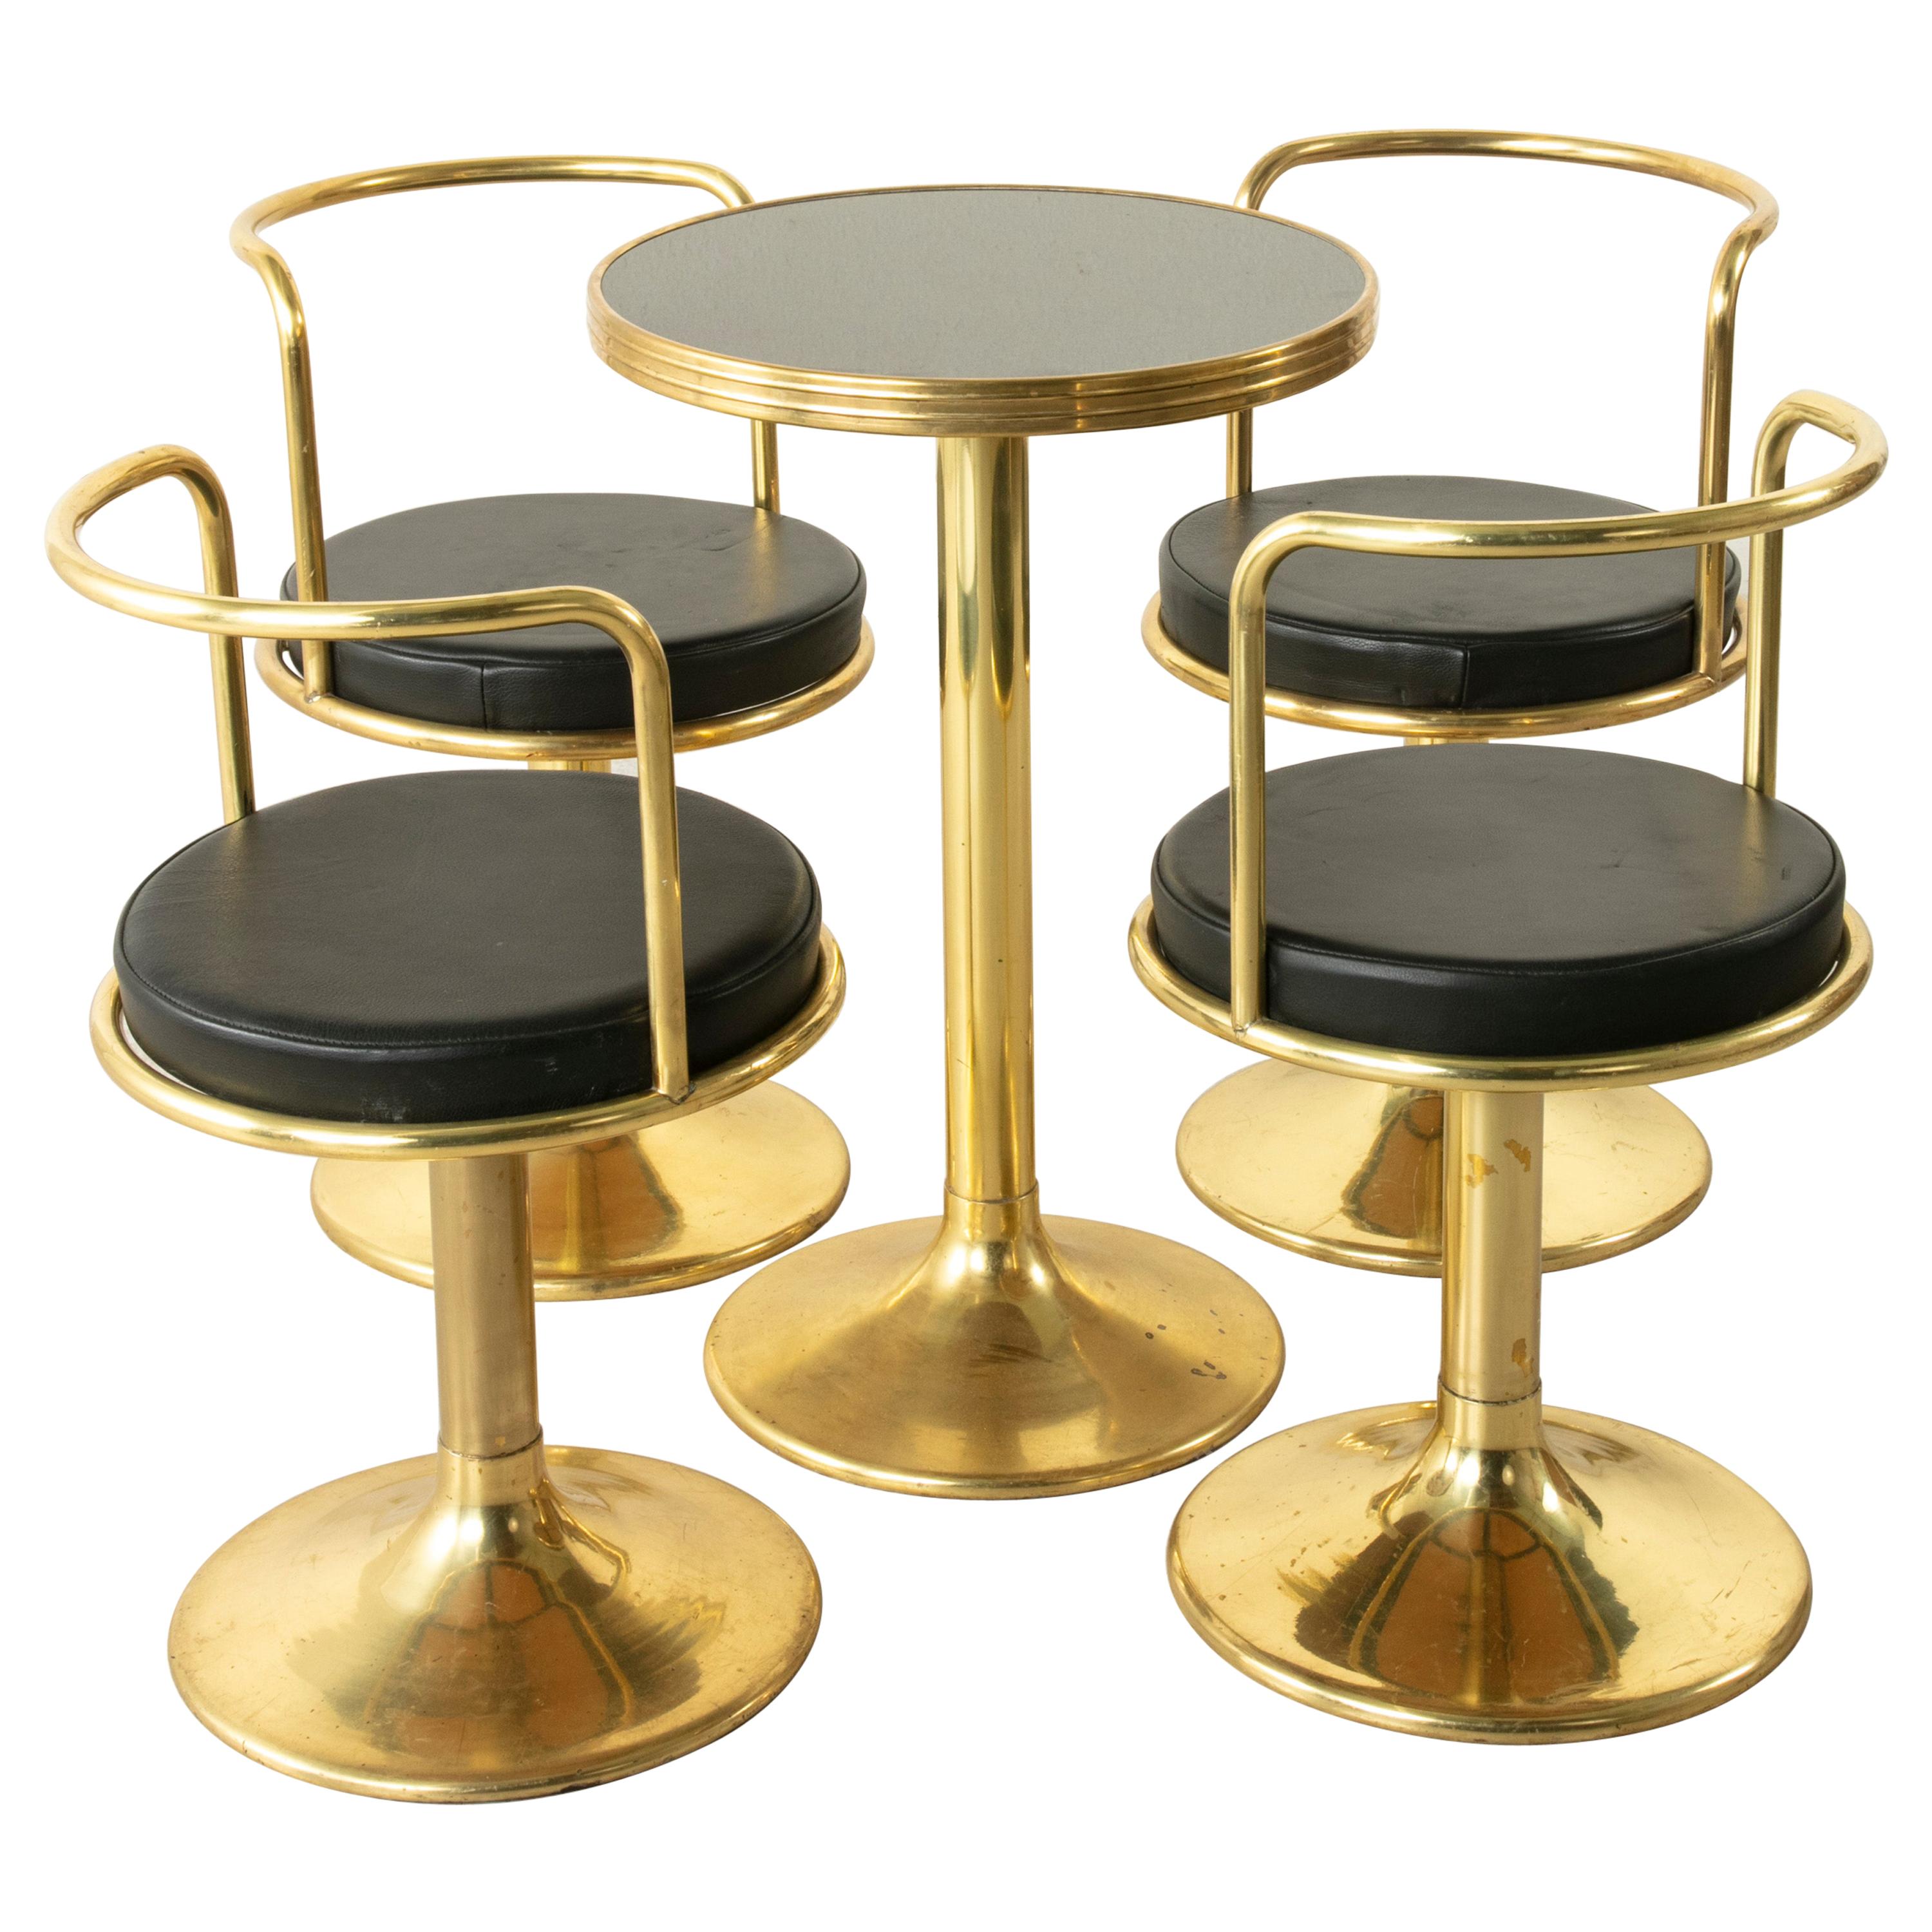 Midcentury French Brass Bistro Set with Black Marble-Top Table and Four Chairs